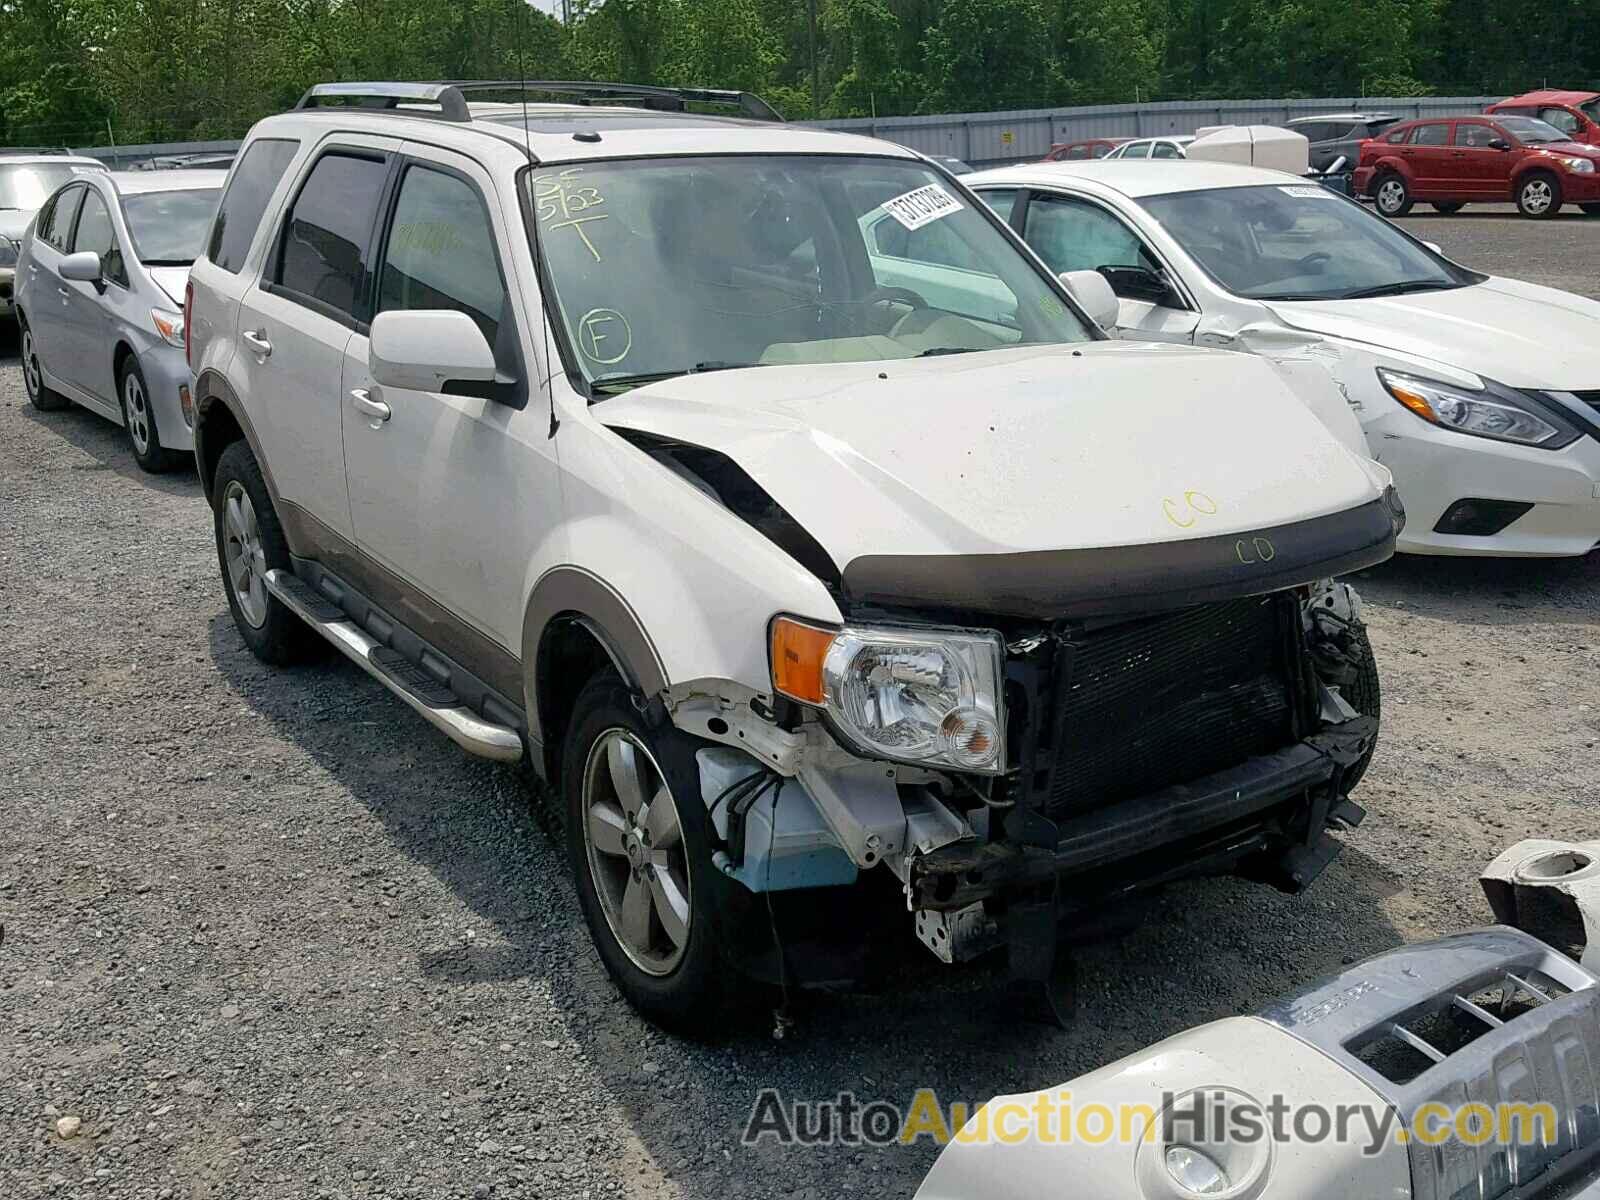 2009 FORD ESCAPE LIMITED, 1FMCU94G09KC33516